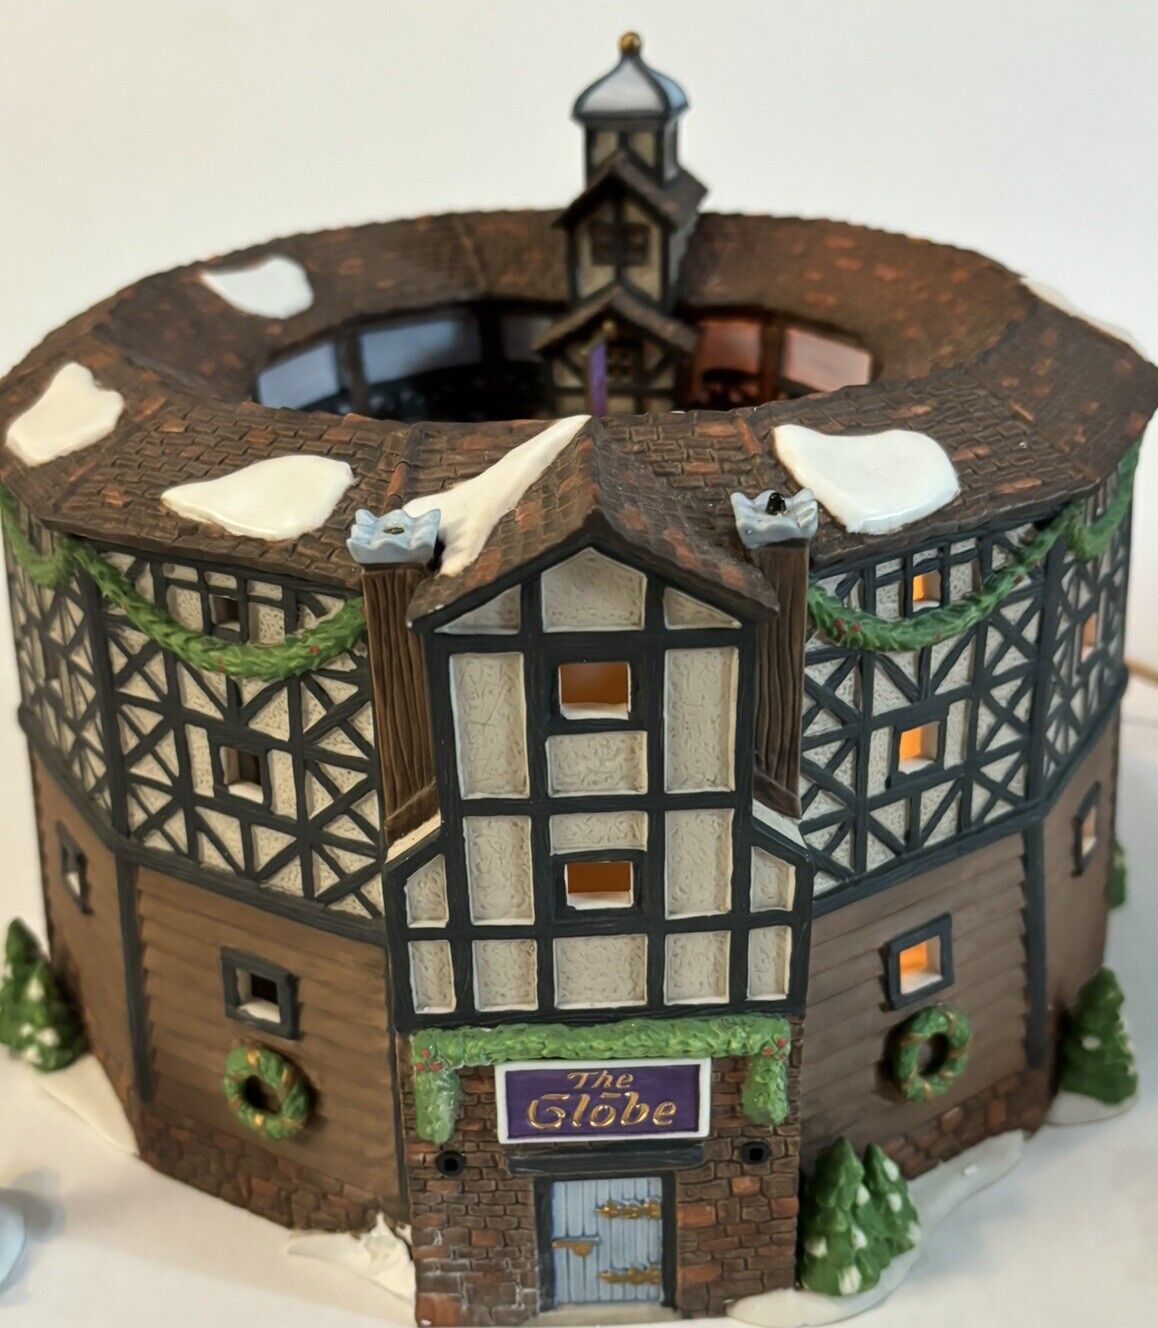 Department 56 The Old Globe Theatre Christmas Dickens Village 58501 Pls Read All